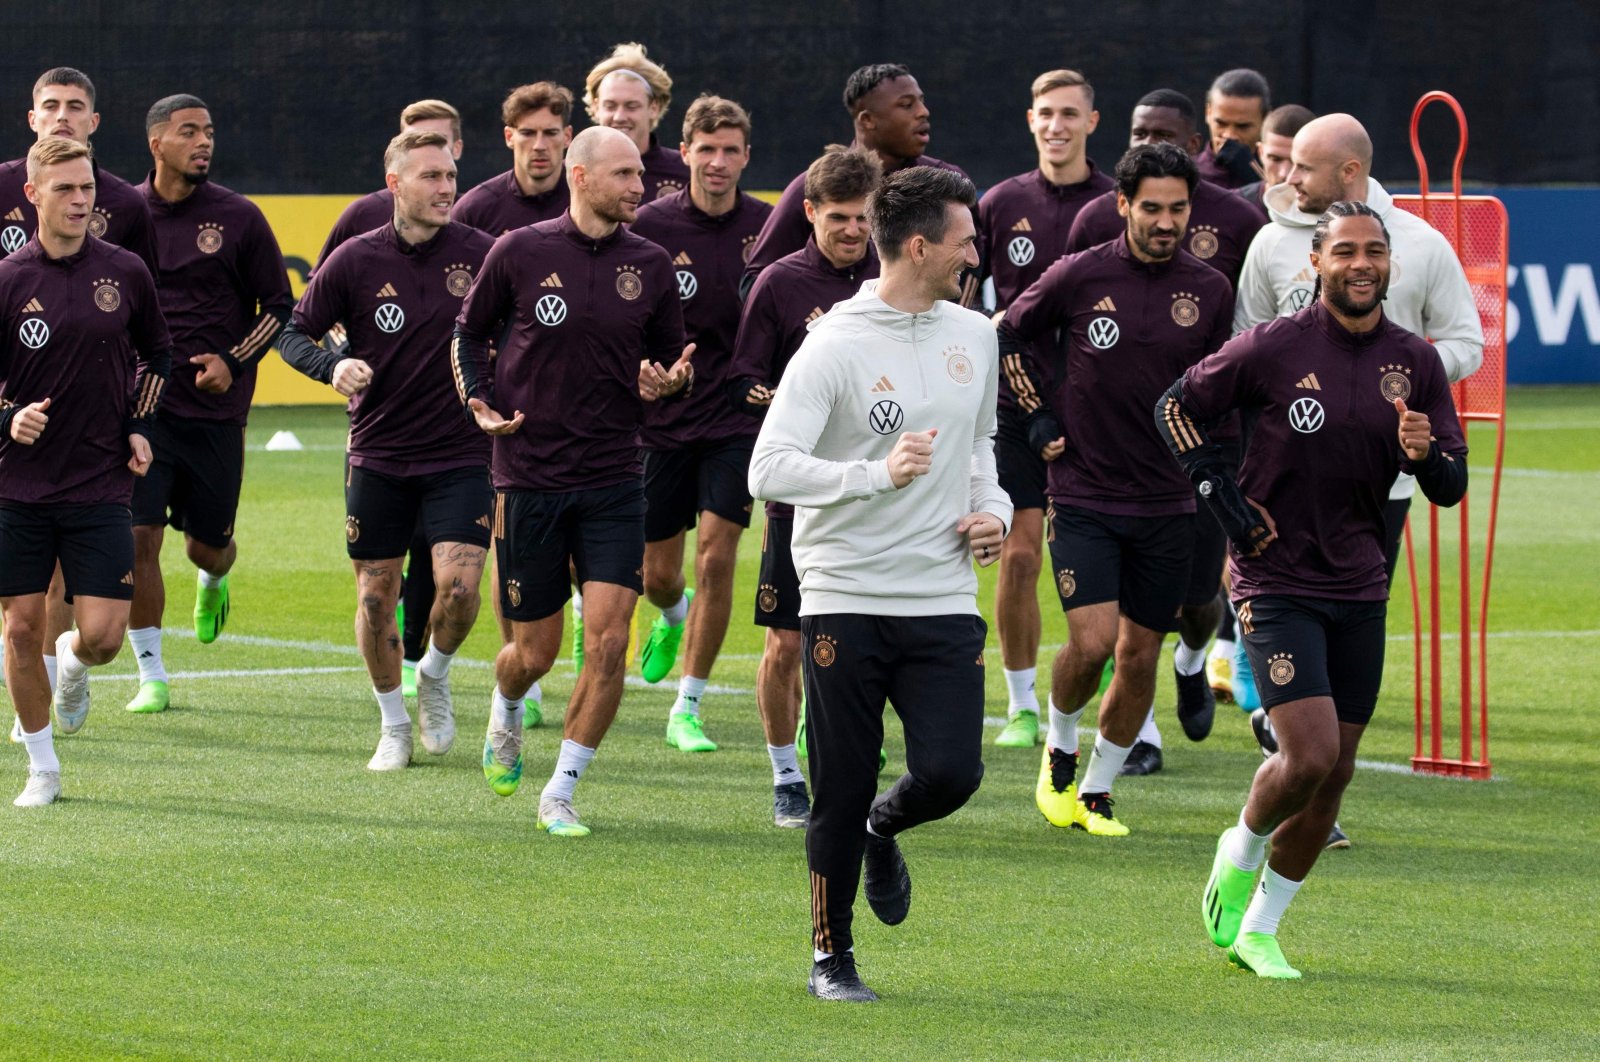 Germany players warm up during a training session at the DFB campus in Frankfurt am Main, western Germany, Sept. 20, 2022.